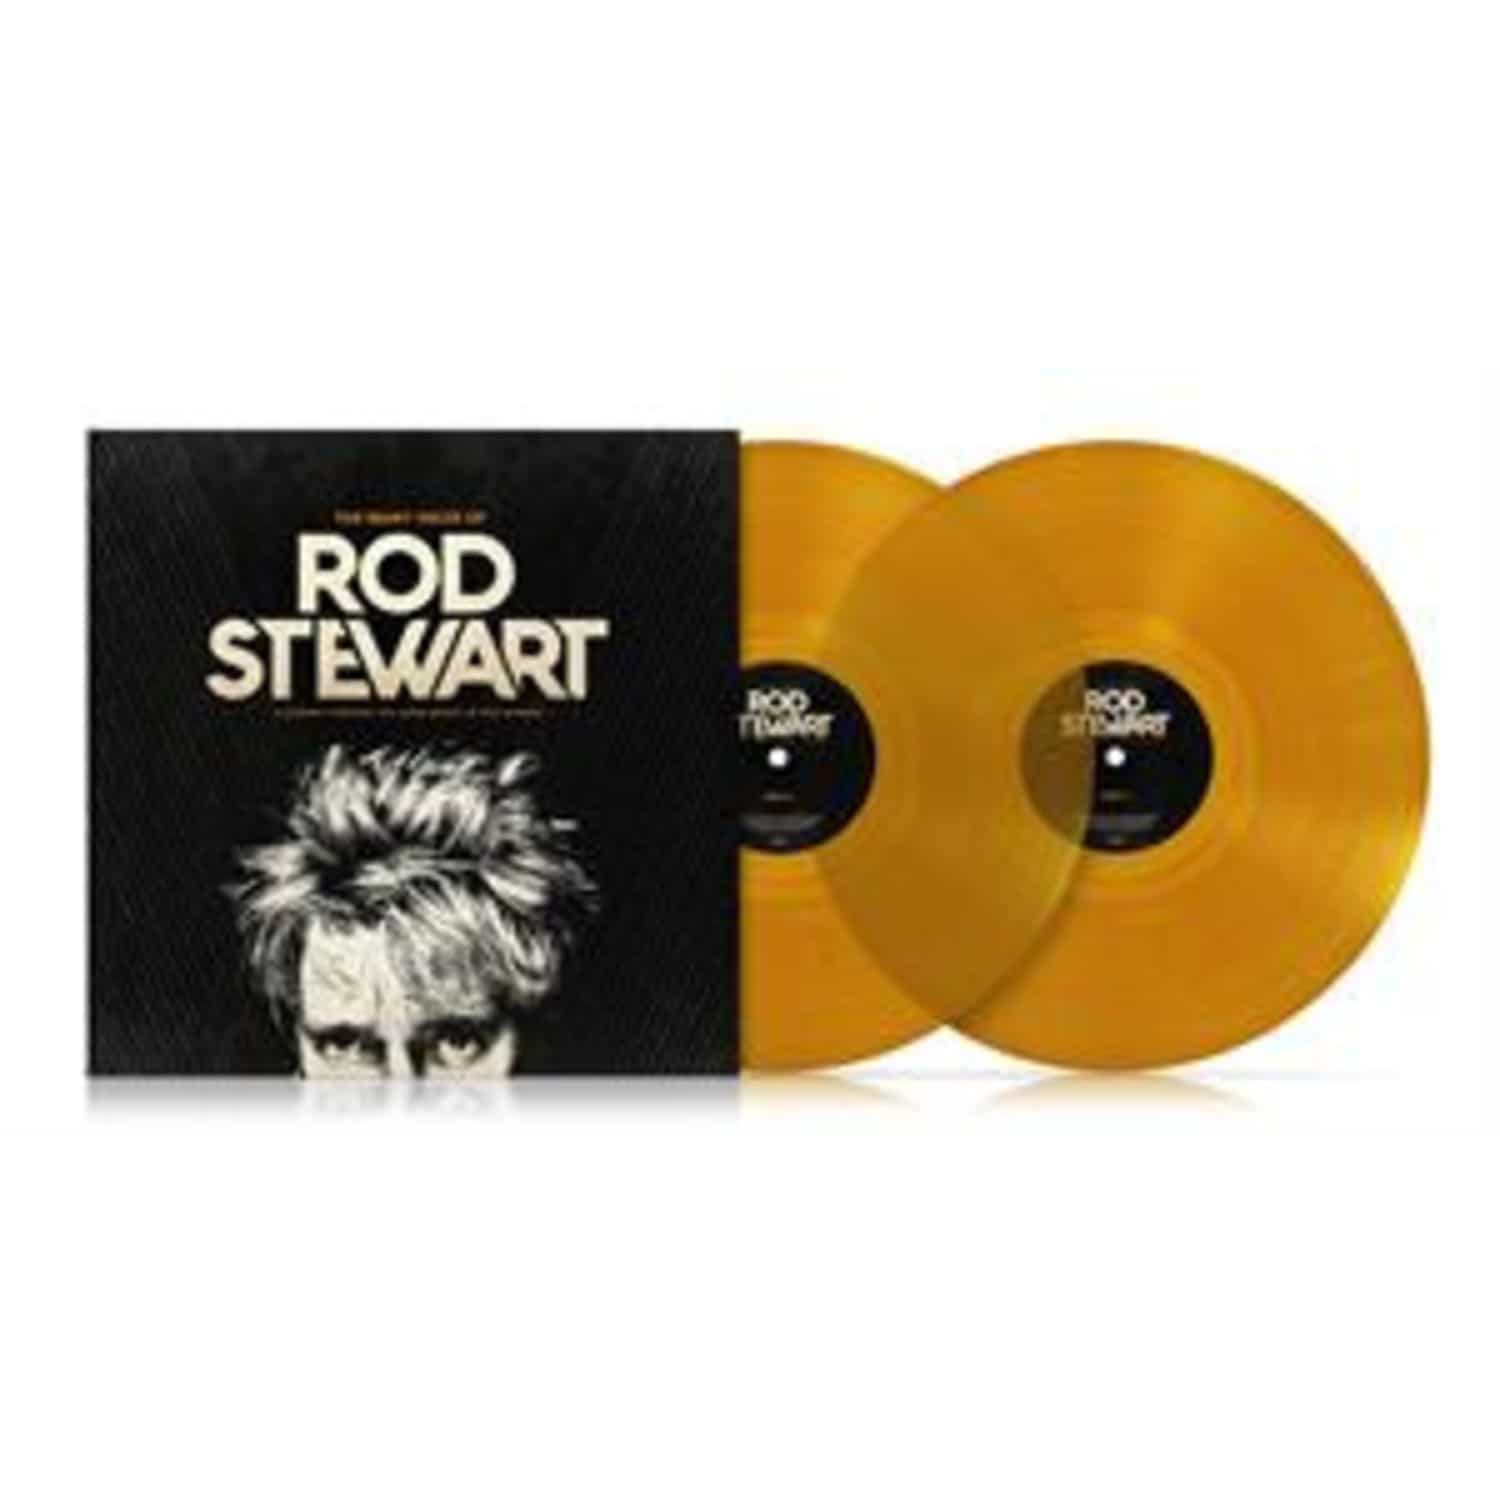 Rod Stewart / Various - MANY FACES OF ROD STEWART 